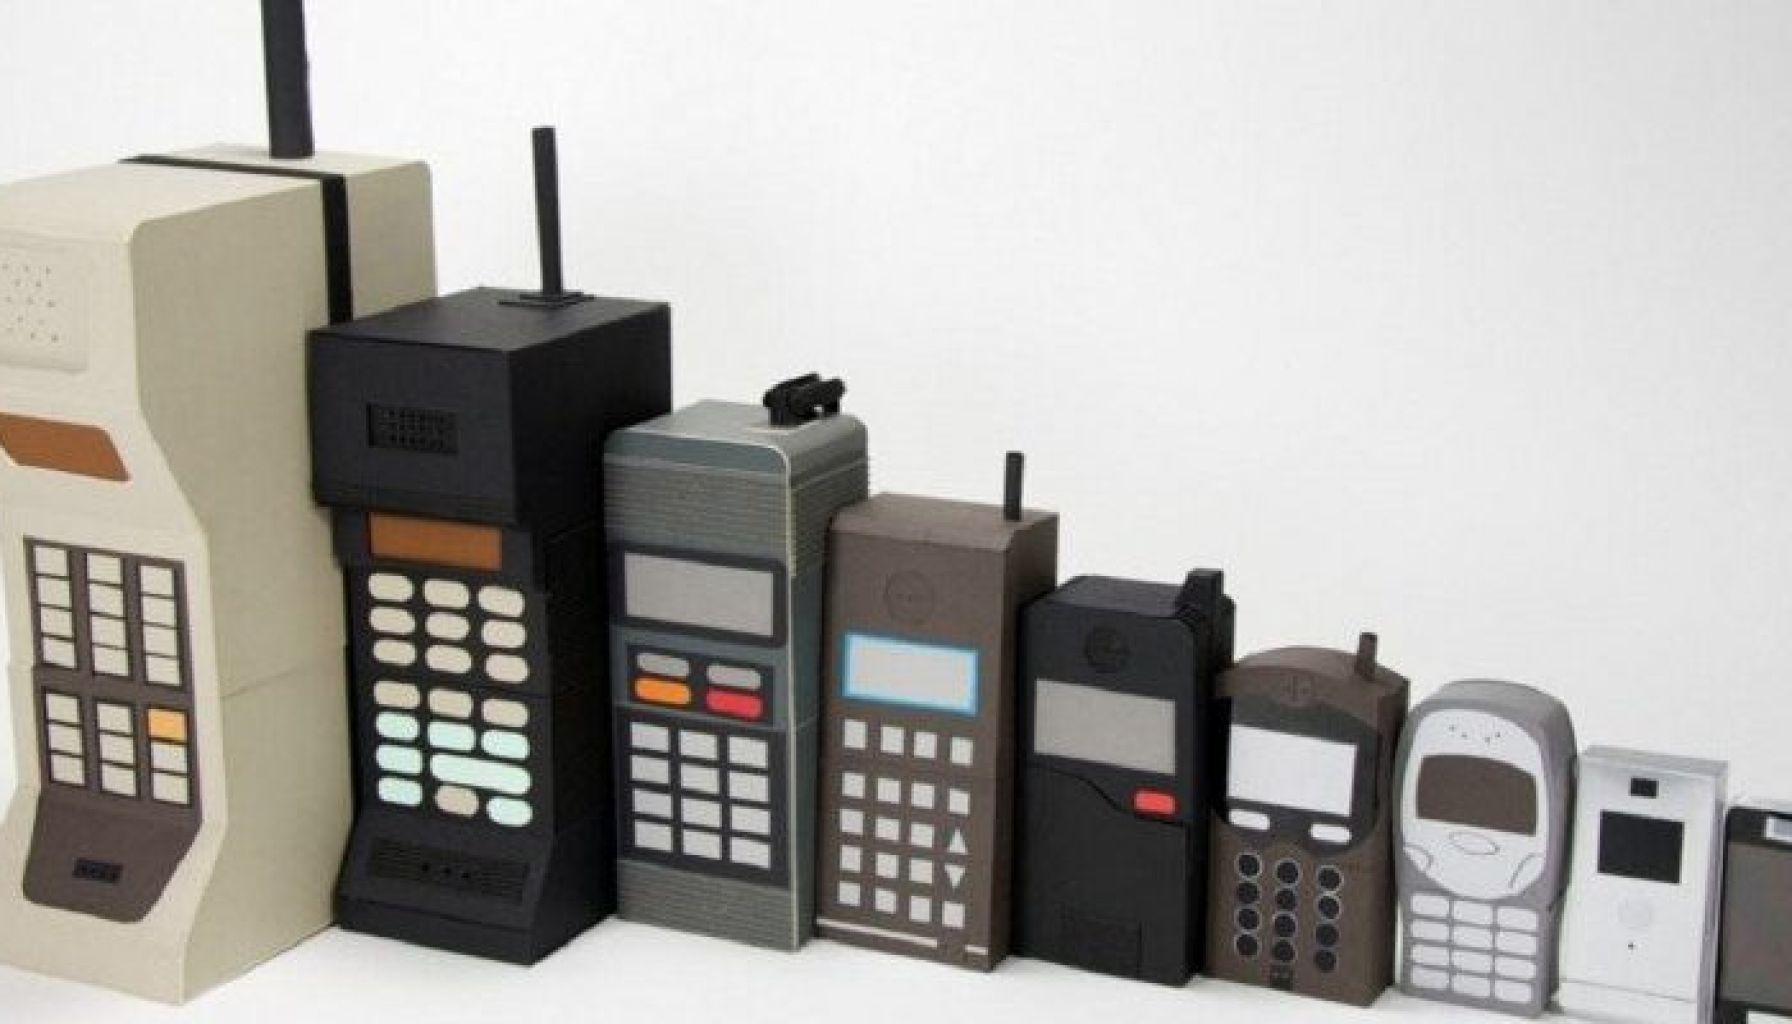 The-Worlds-First-Mobile-Phones-and-Their-Surprising-Features-788x400-1.jpg